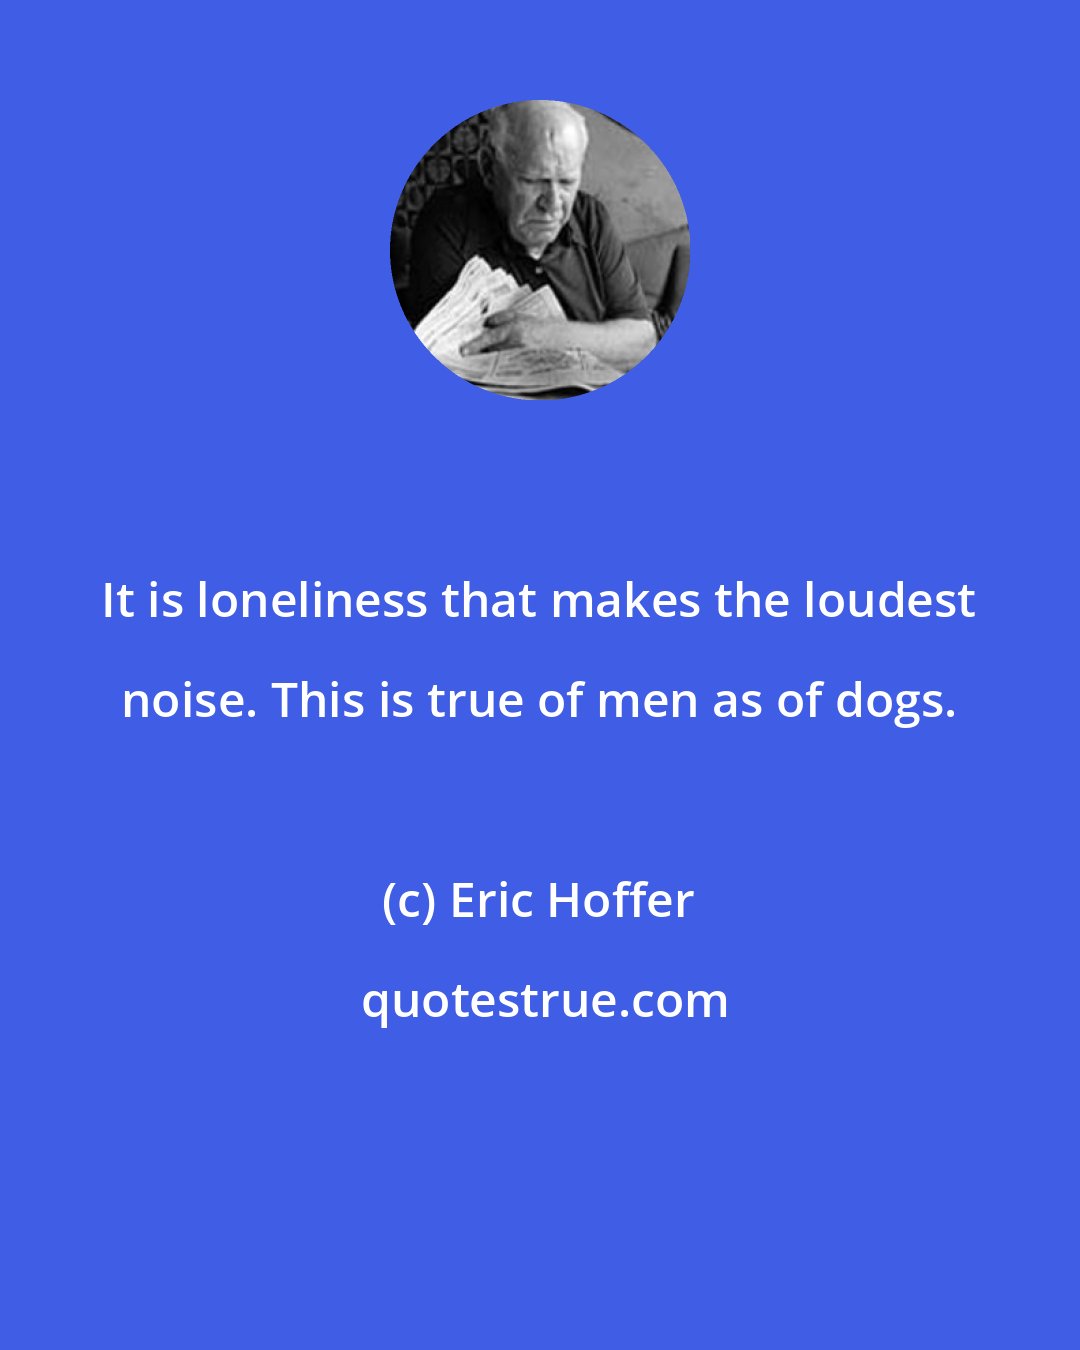 Eric Hoffer: It is loneliness that makes the loudest noise. This is true of men as of dogs.